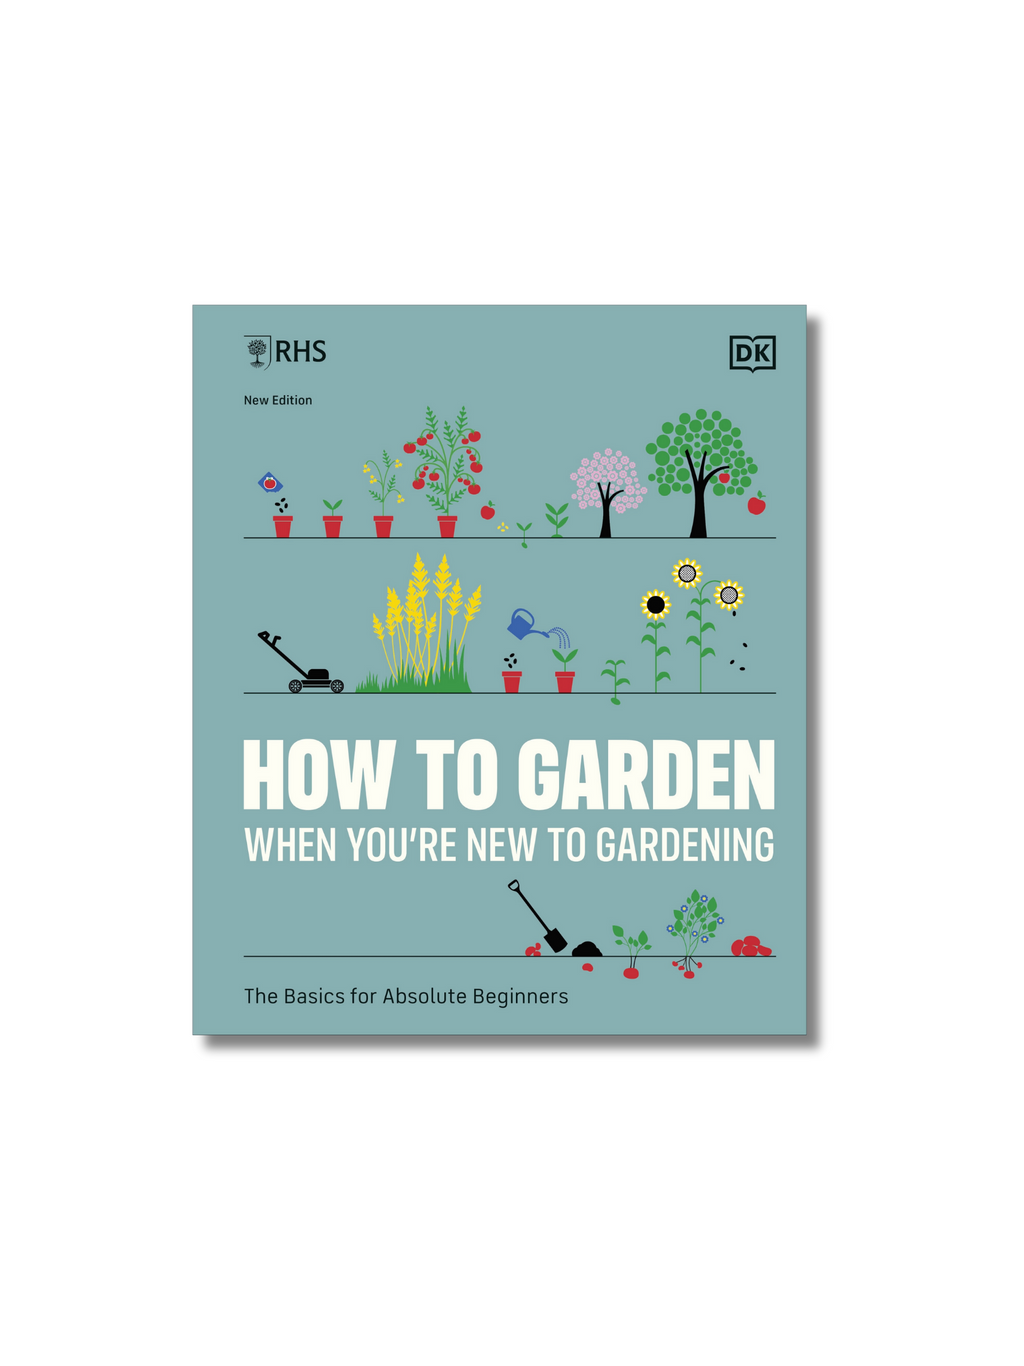 How to Garden When You're New to Gardening: The Basics for Absolute Beginners